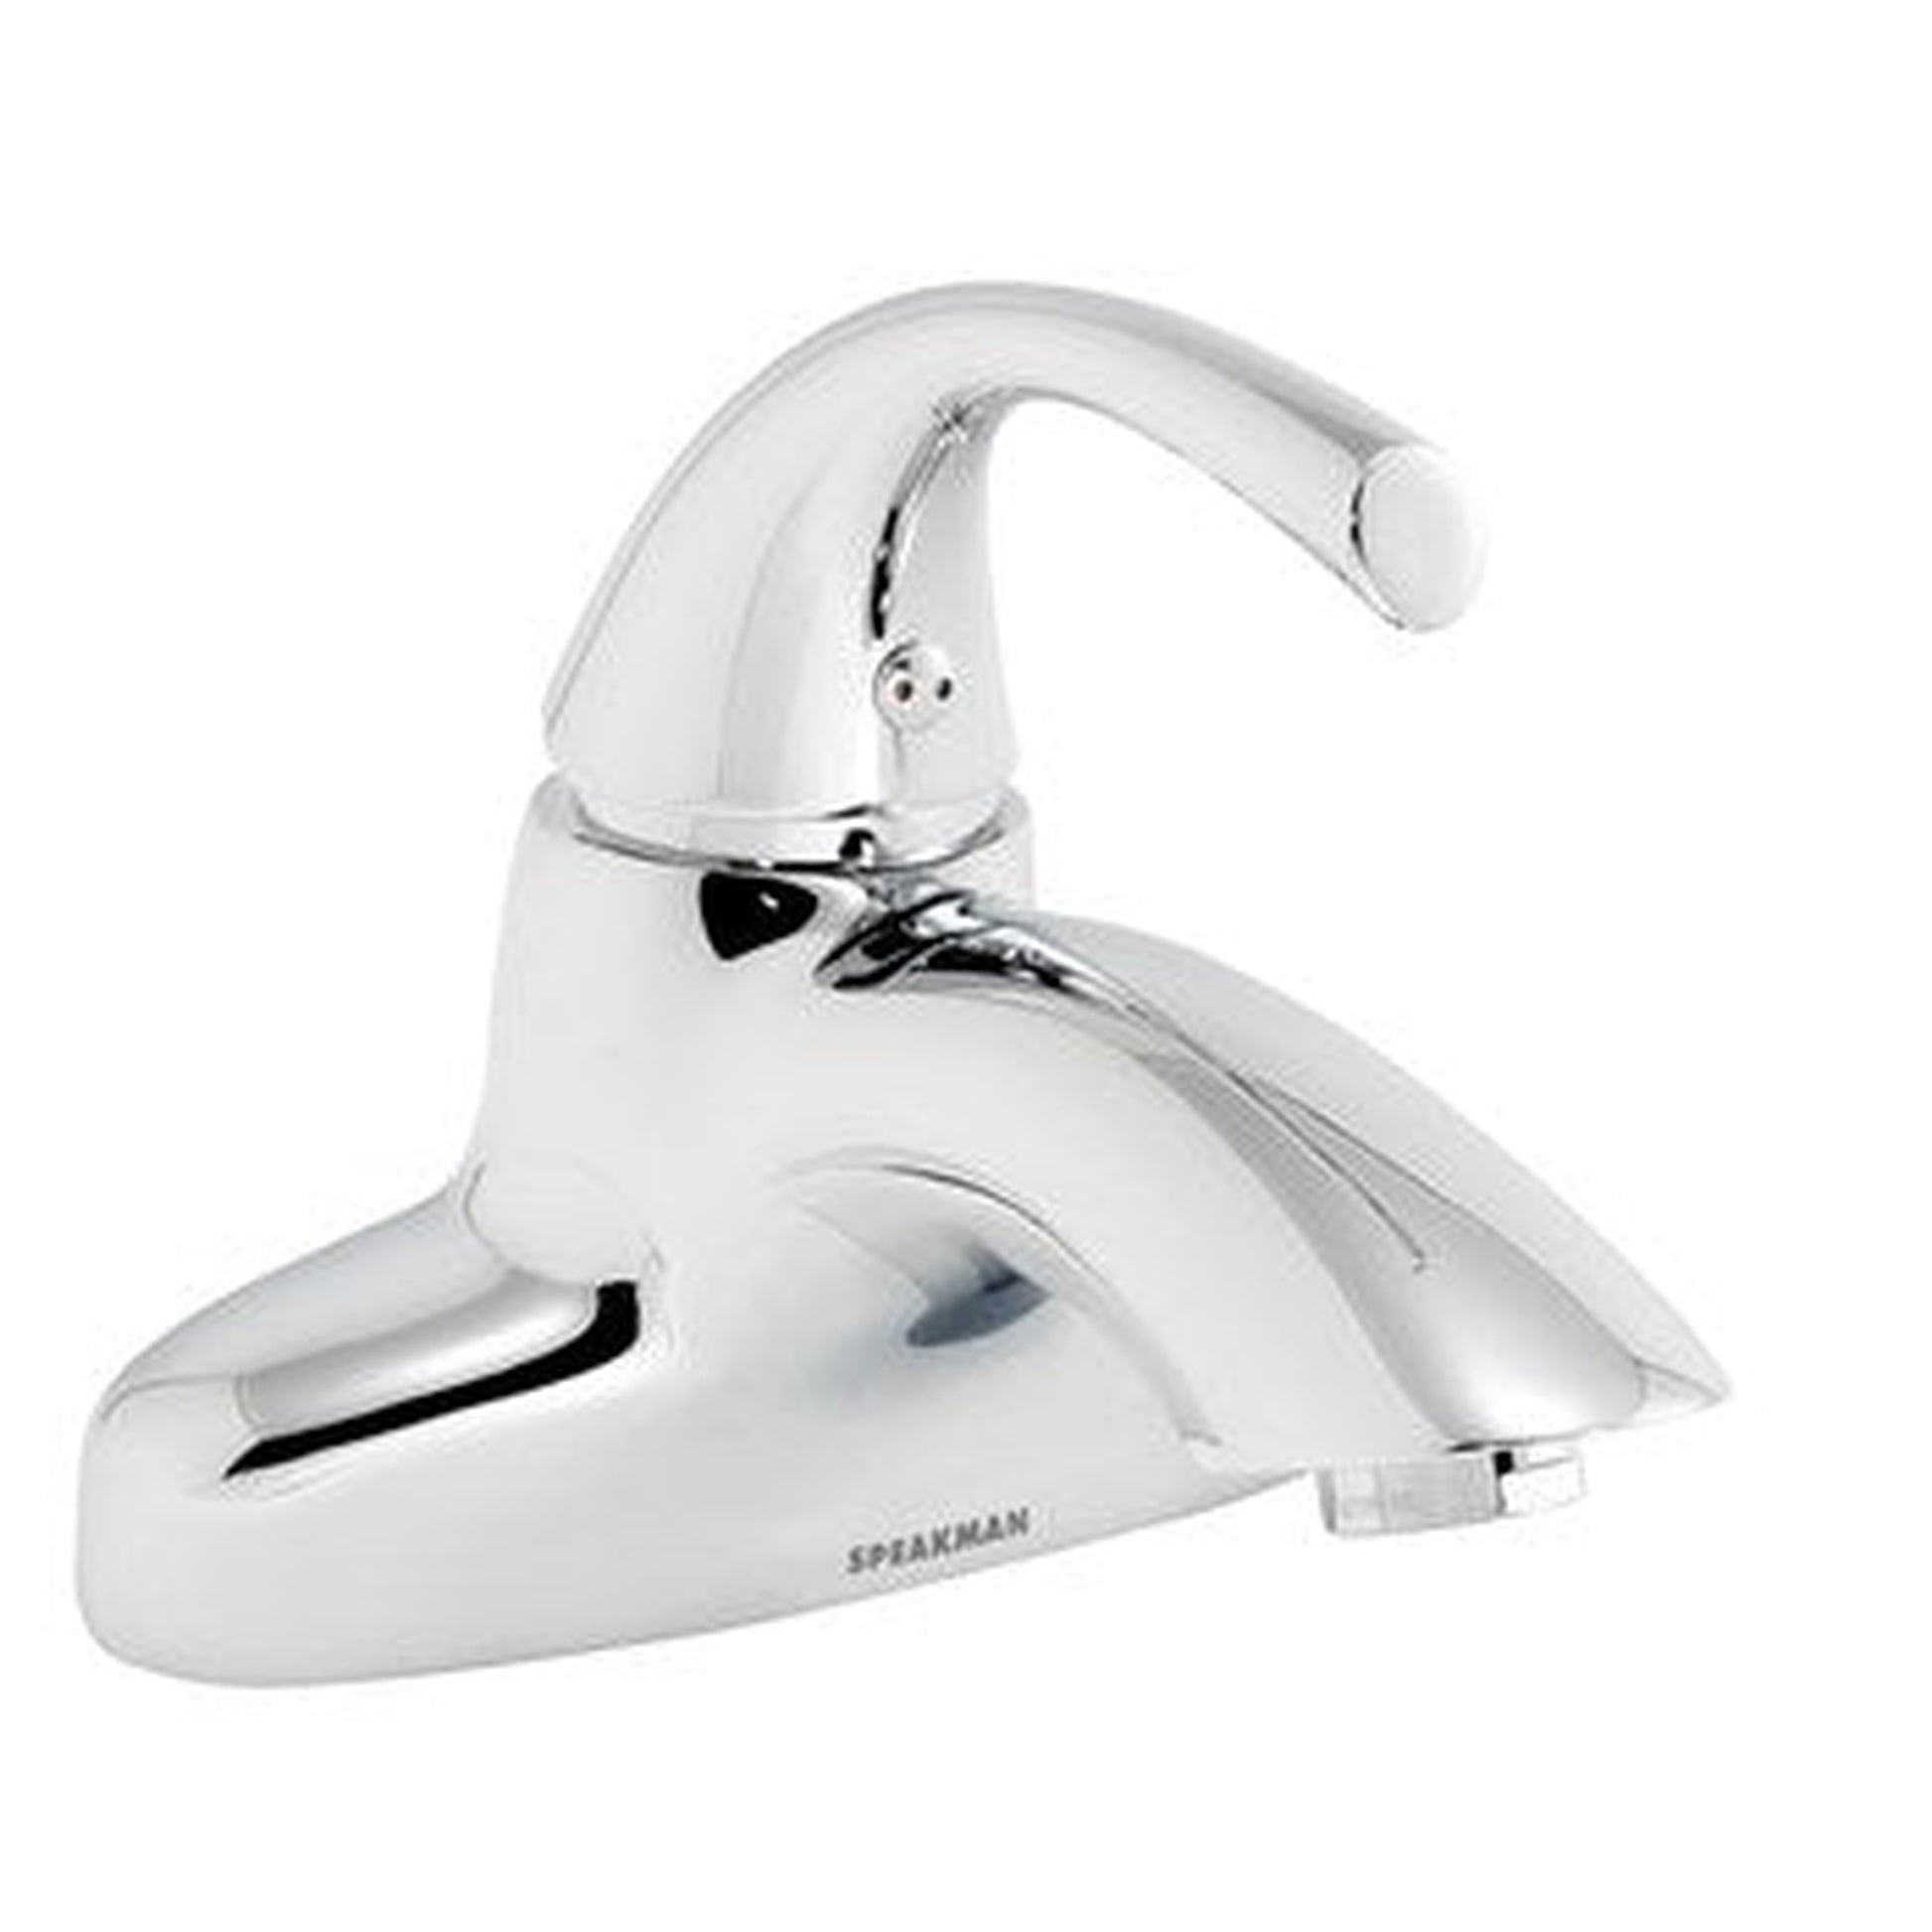 Speakman Polished Chrome 1.5 GPM Single Lever Faucet With 0.5 GPM Boca Aerator